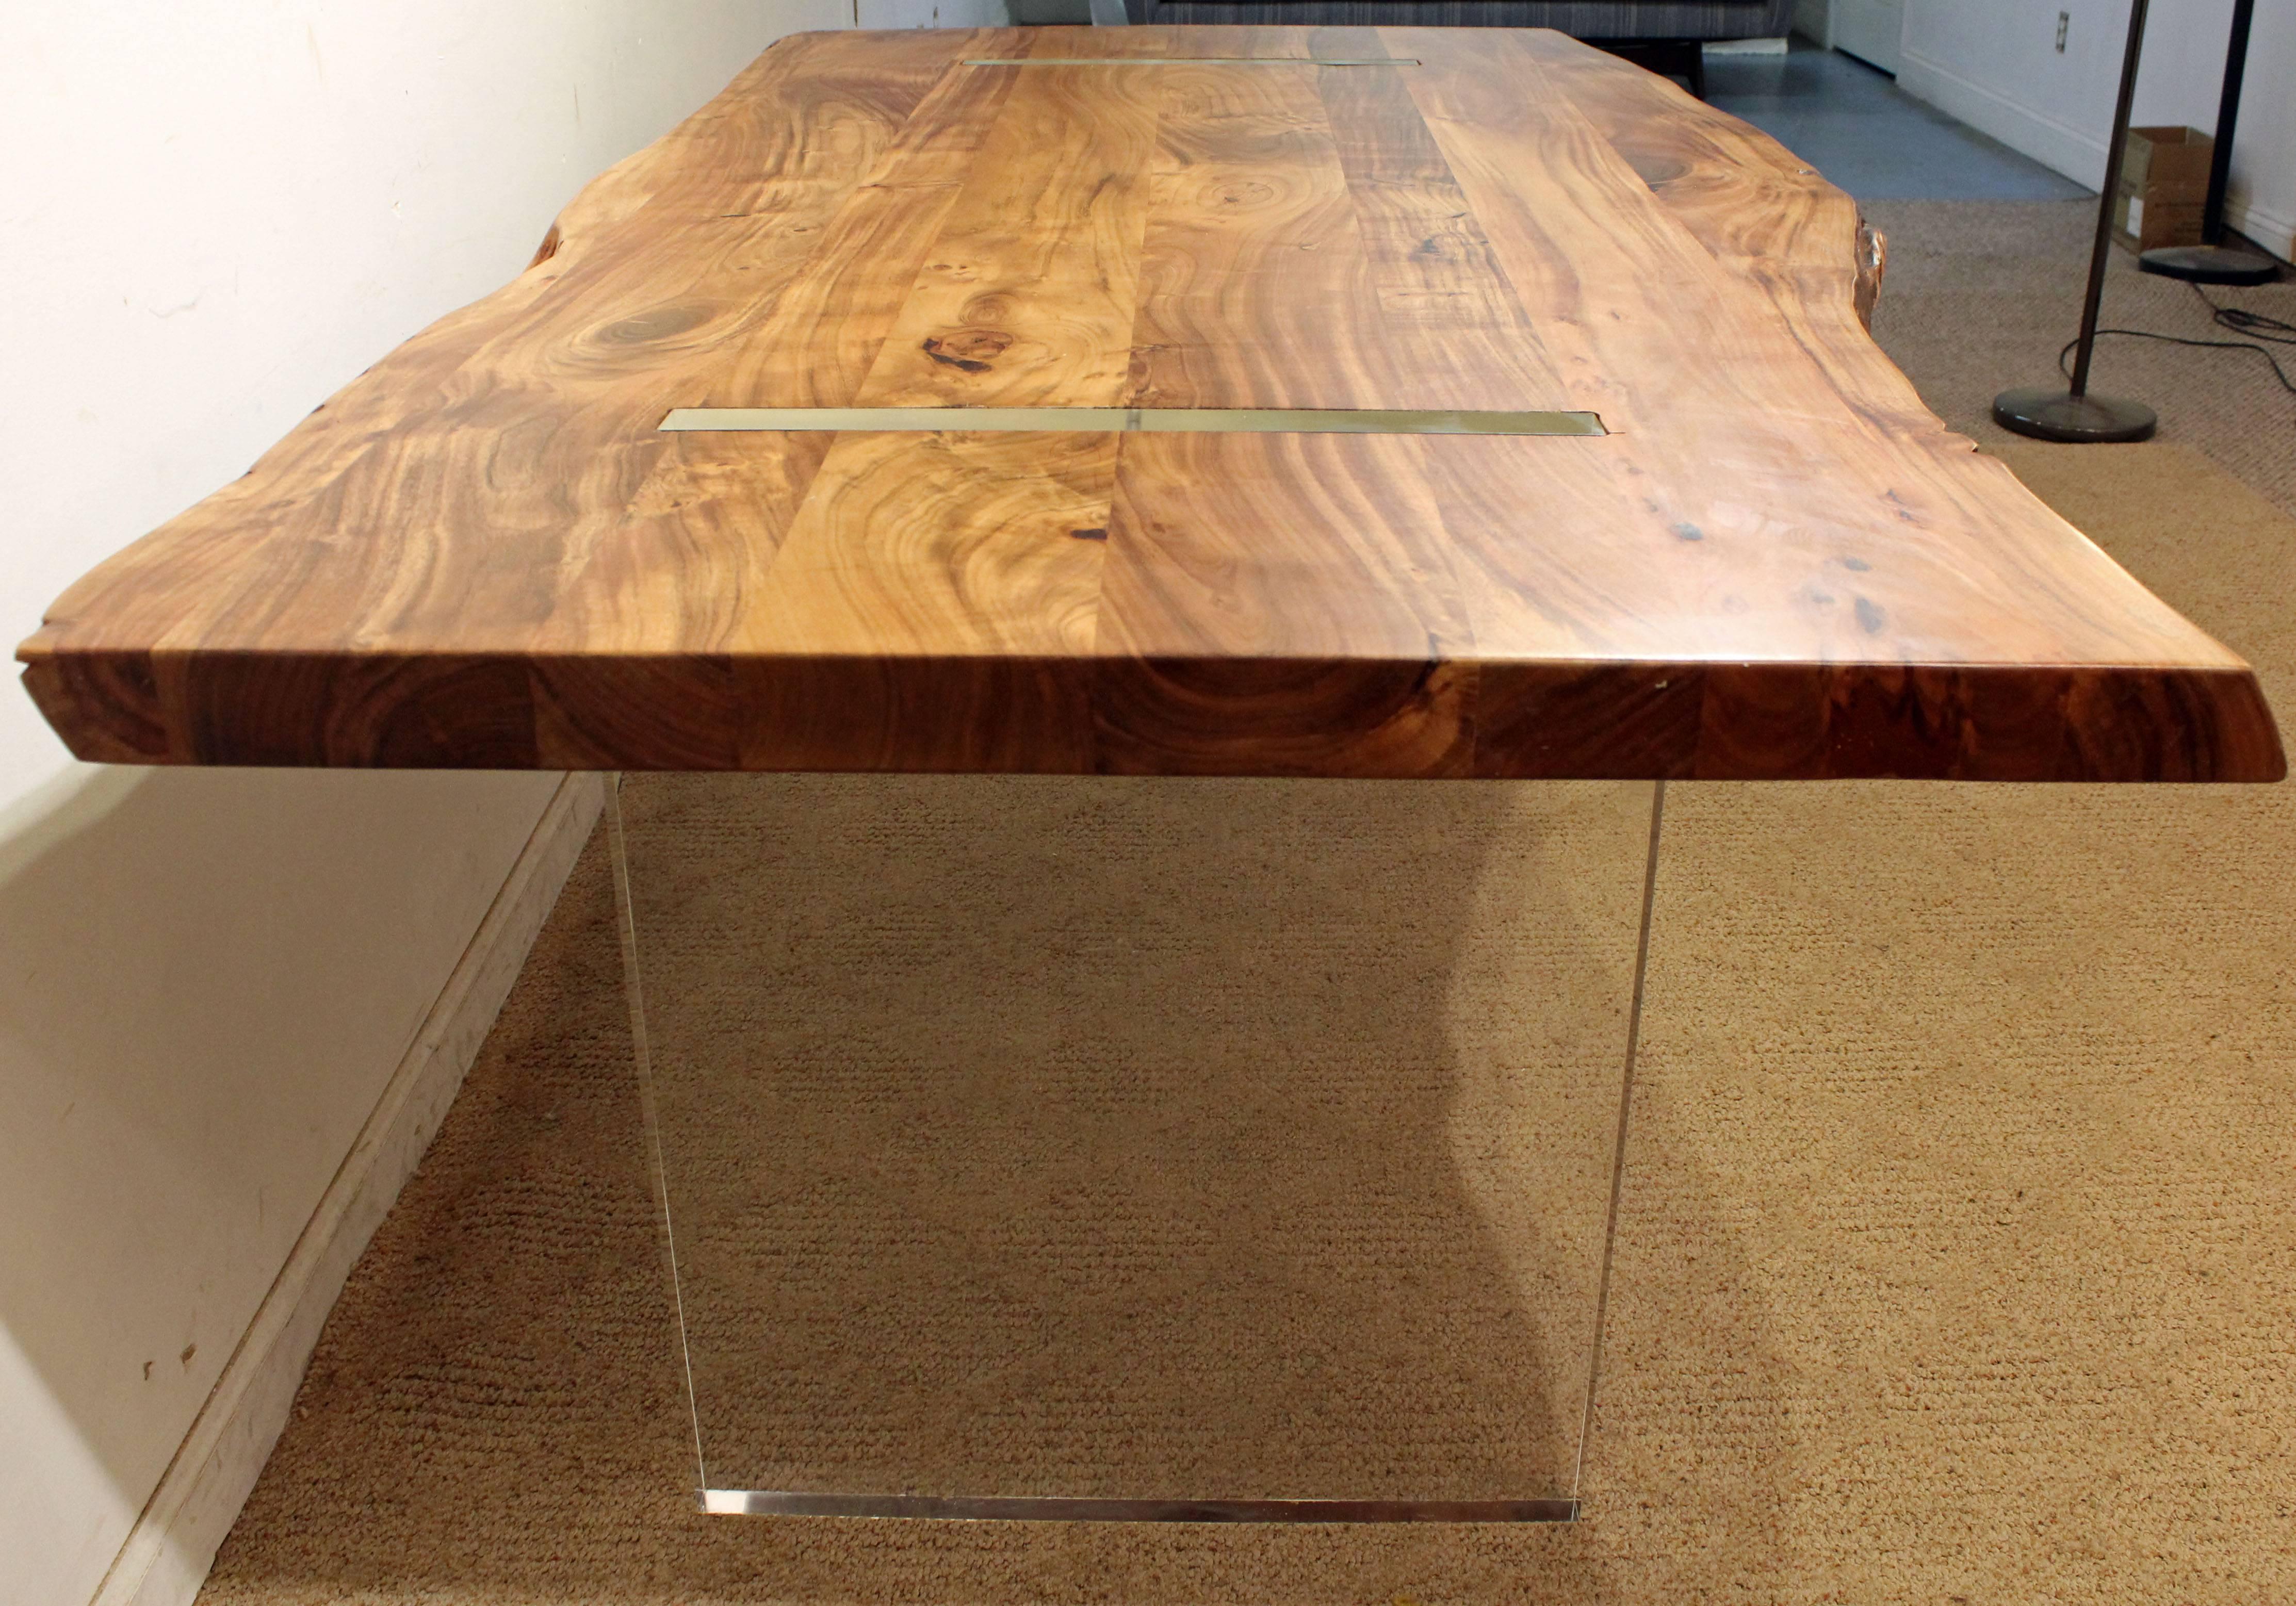 Unknown Modern Designer Studio Floating Top Acacia Wood and Lucite Dining Table